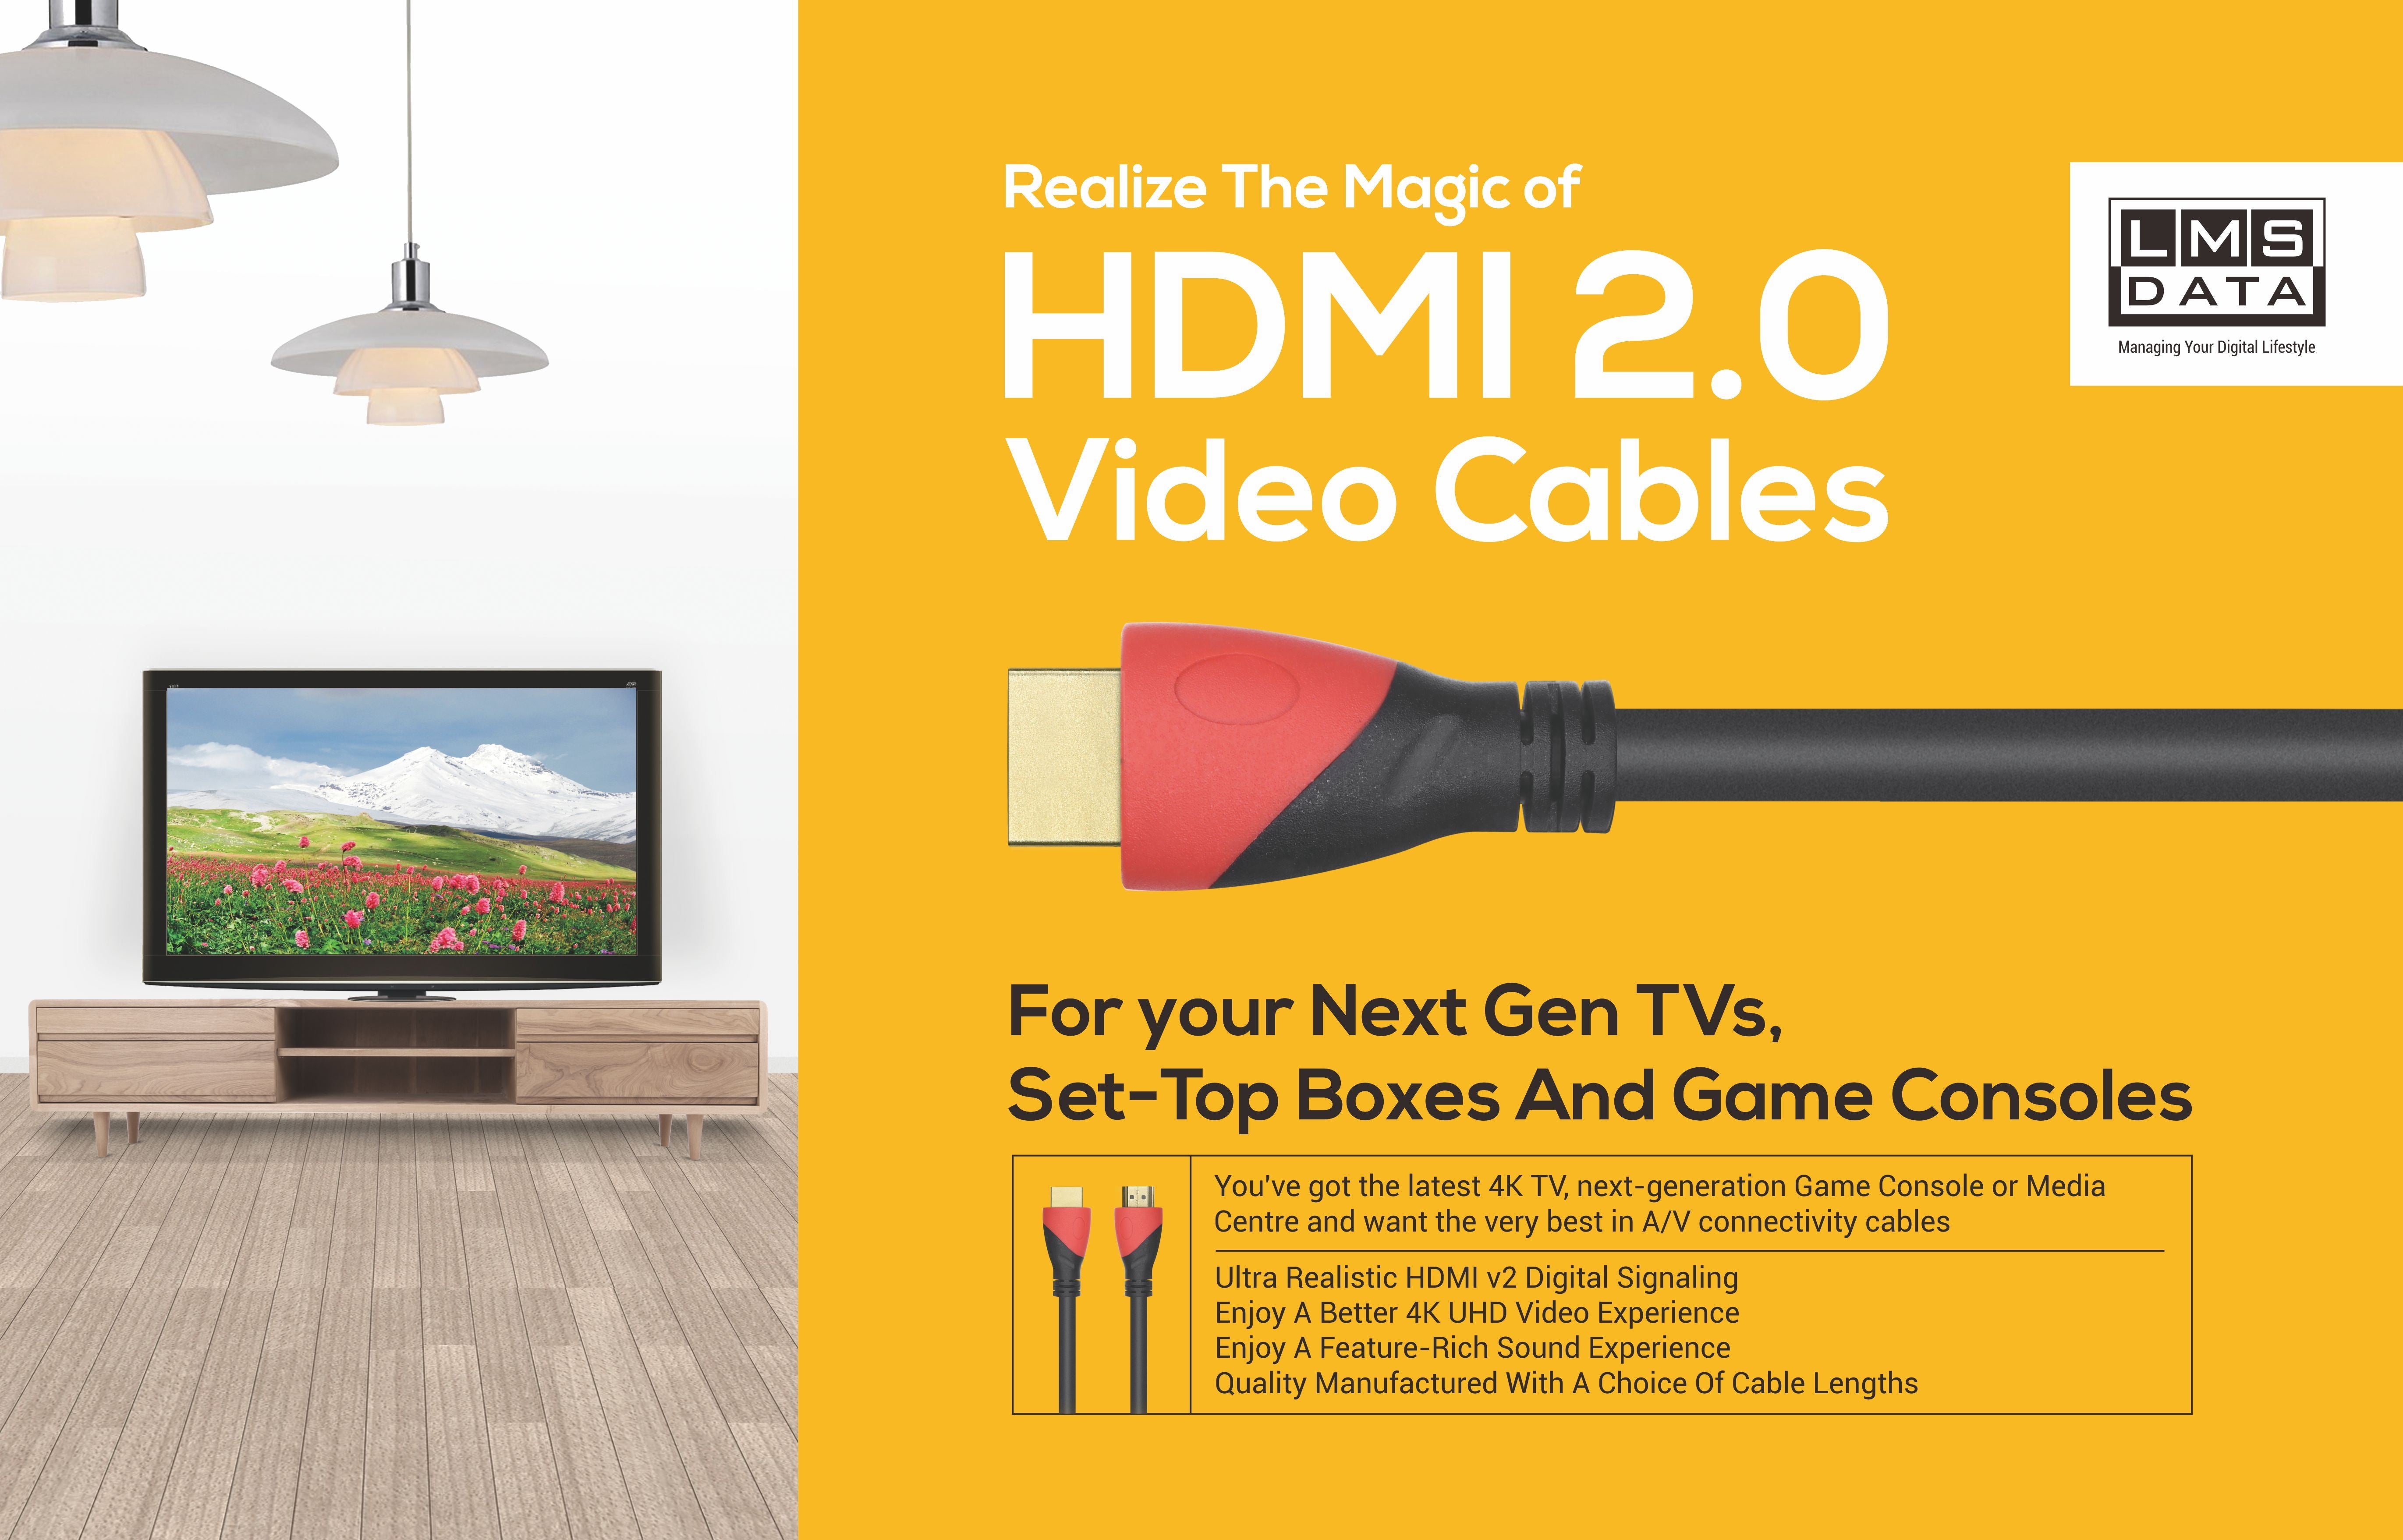 High Speed 4K HDMI2.0 Cable - 1.8m (Retail Blister) - Netbit UK